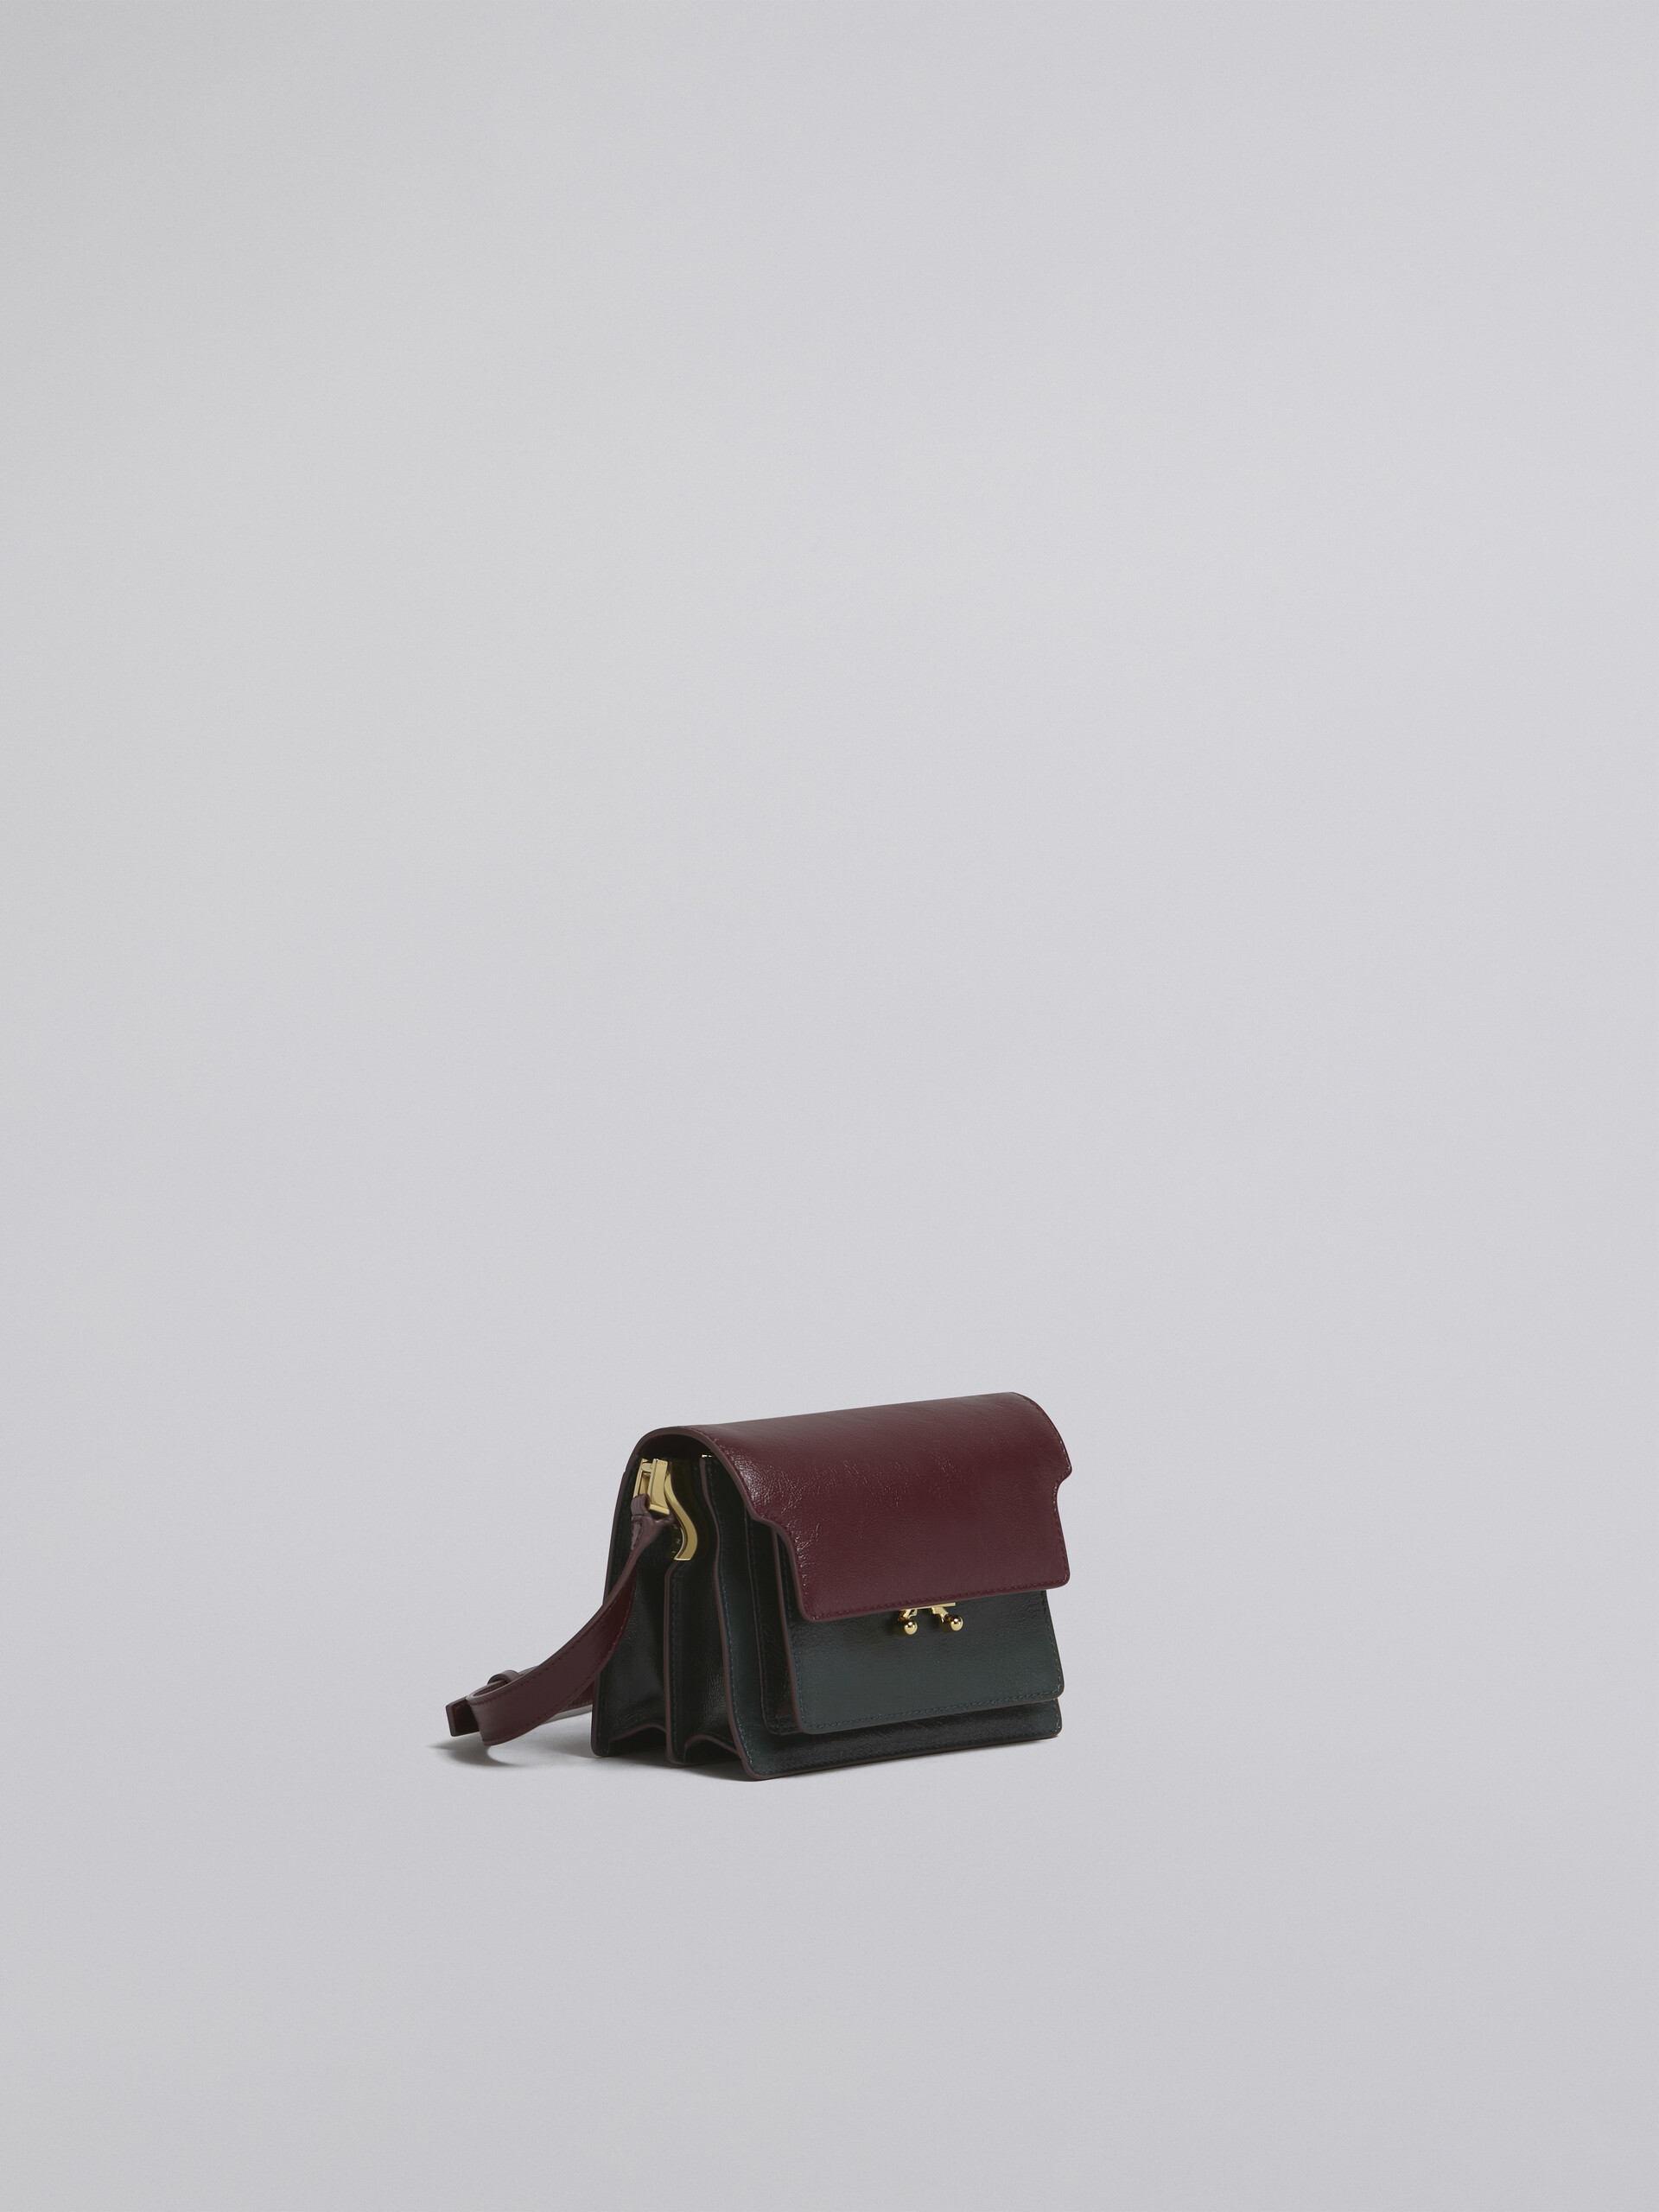 TRUNK SOFT mini bag in green and burgundy leather - Shoulder Bags - Image 5